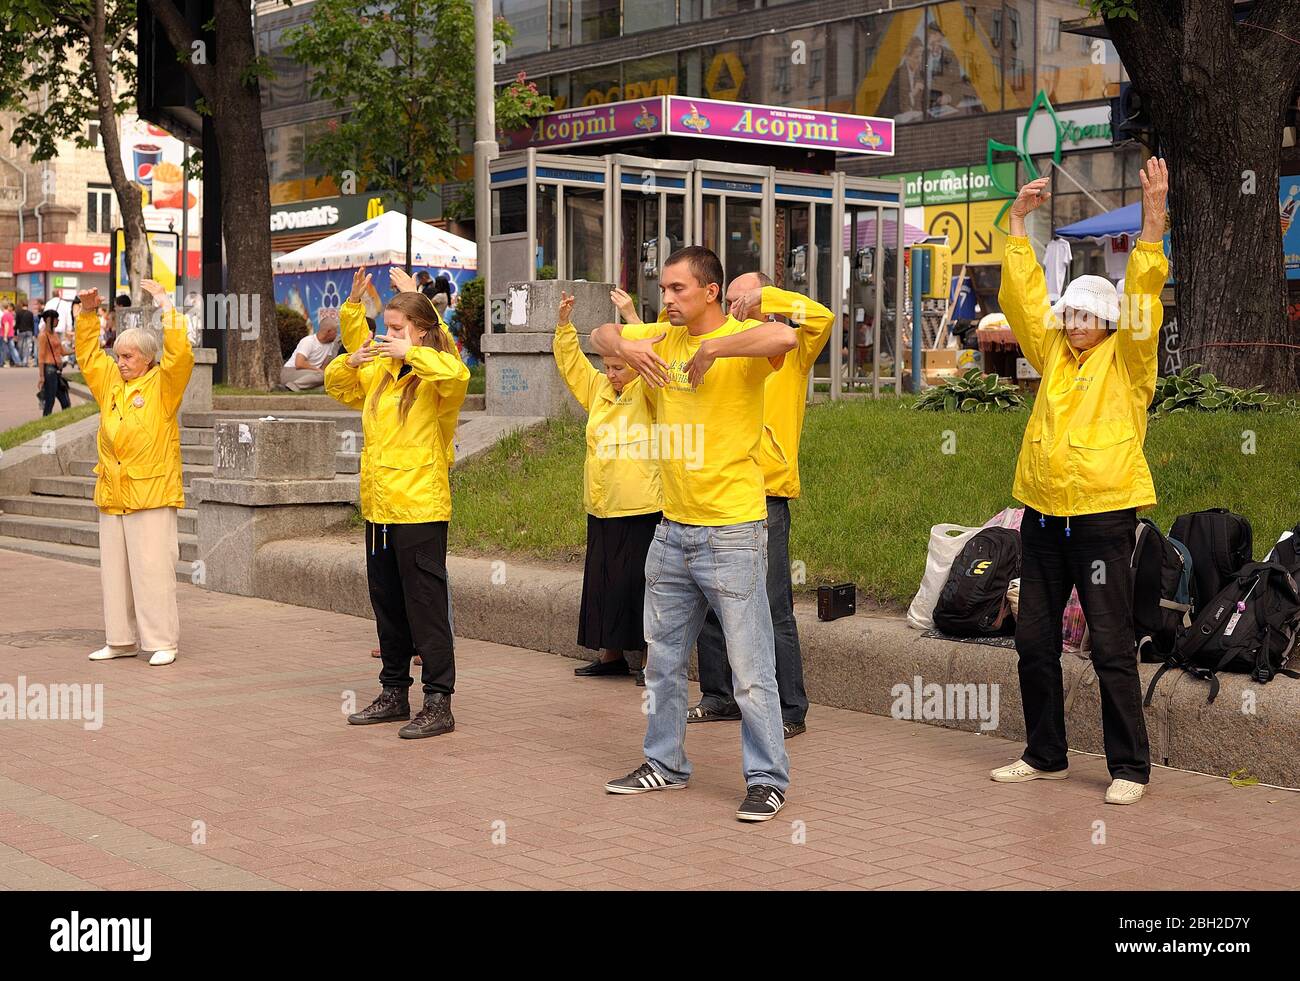 Followers of religious movement Falun dafa doing breathing gymnastics Chi Kung in the street Stock Photo